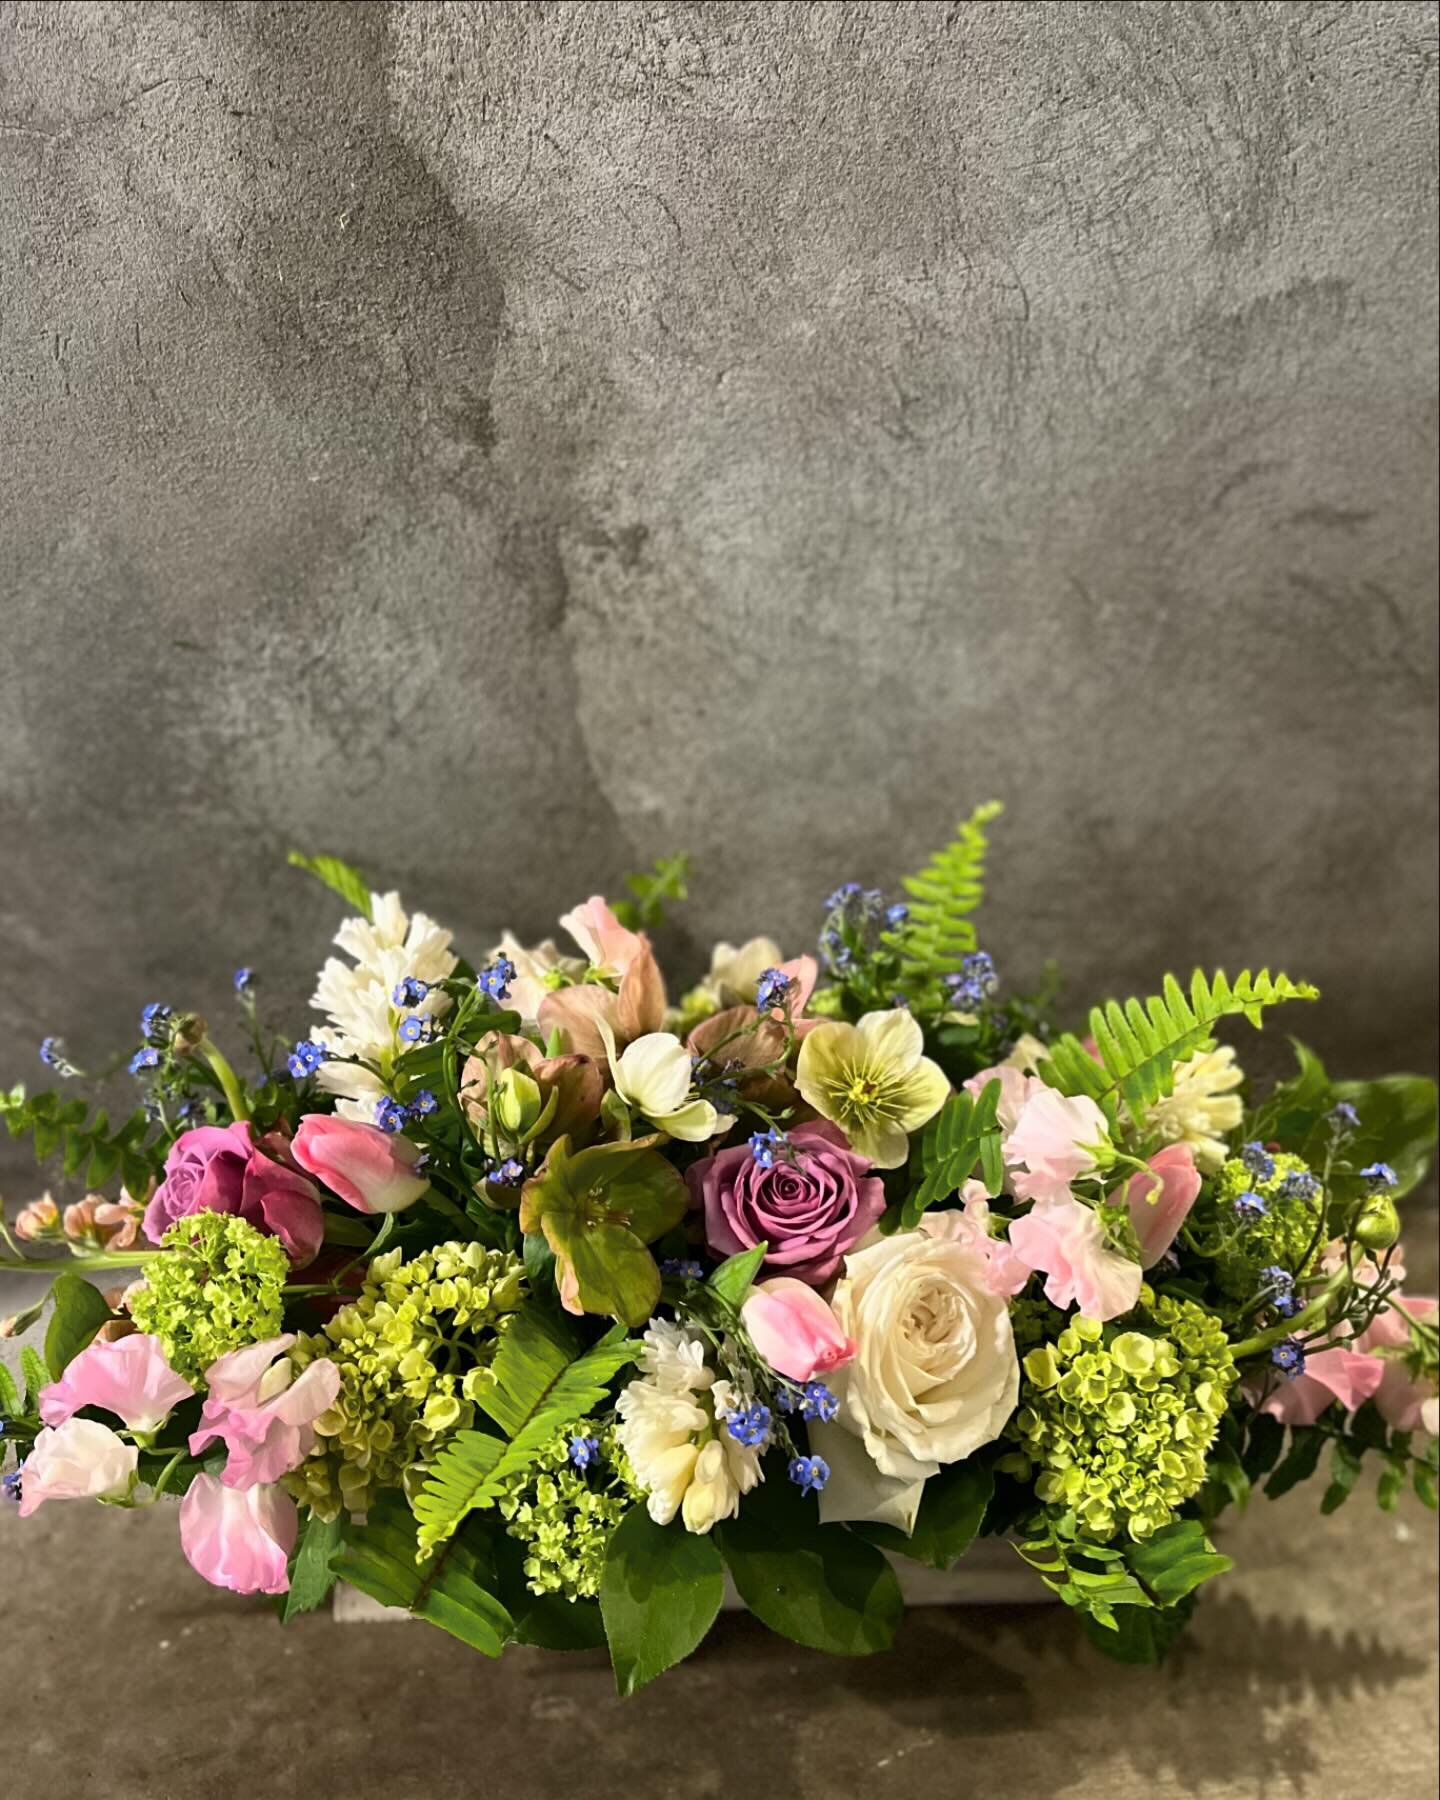 One of our favorite Easter centerpieces from the weekend. That mix of raspberry pink, chartreuse green, and tiny pops of blue makes us smile 😊

#floraldesign #floralcenterpiece #eastercenterpiece #springflowers #springdesign #hellebore #sweatpea #tu